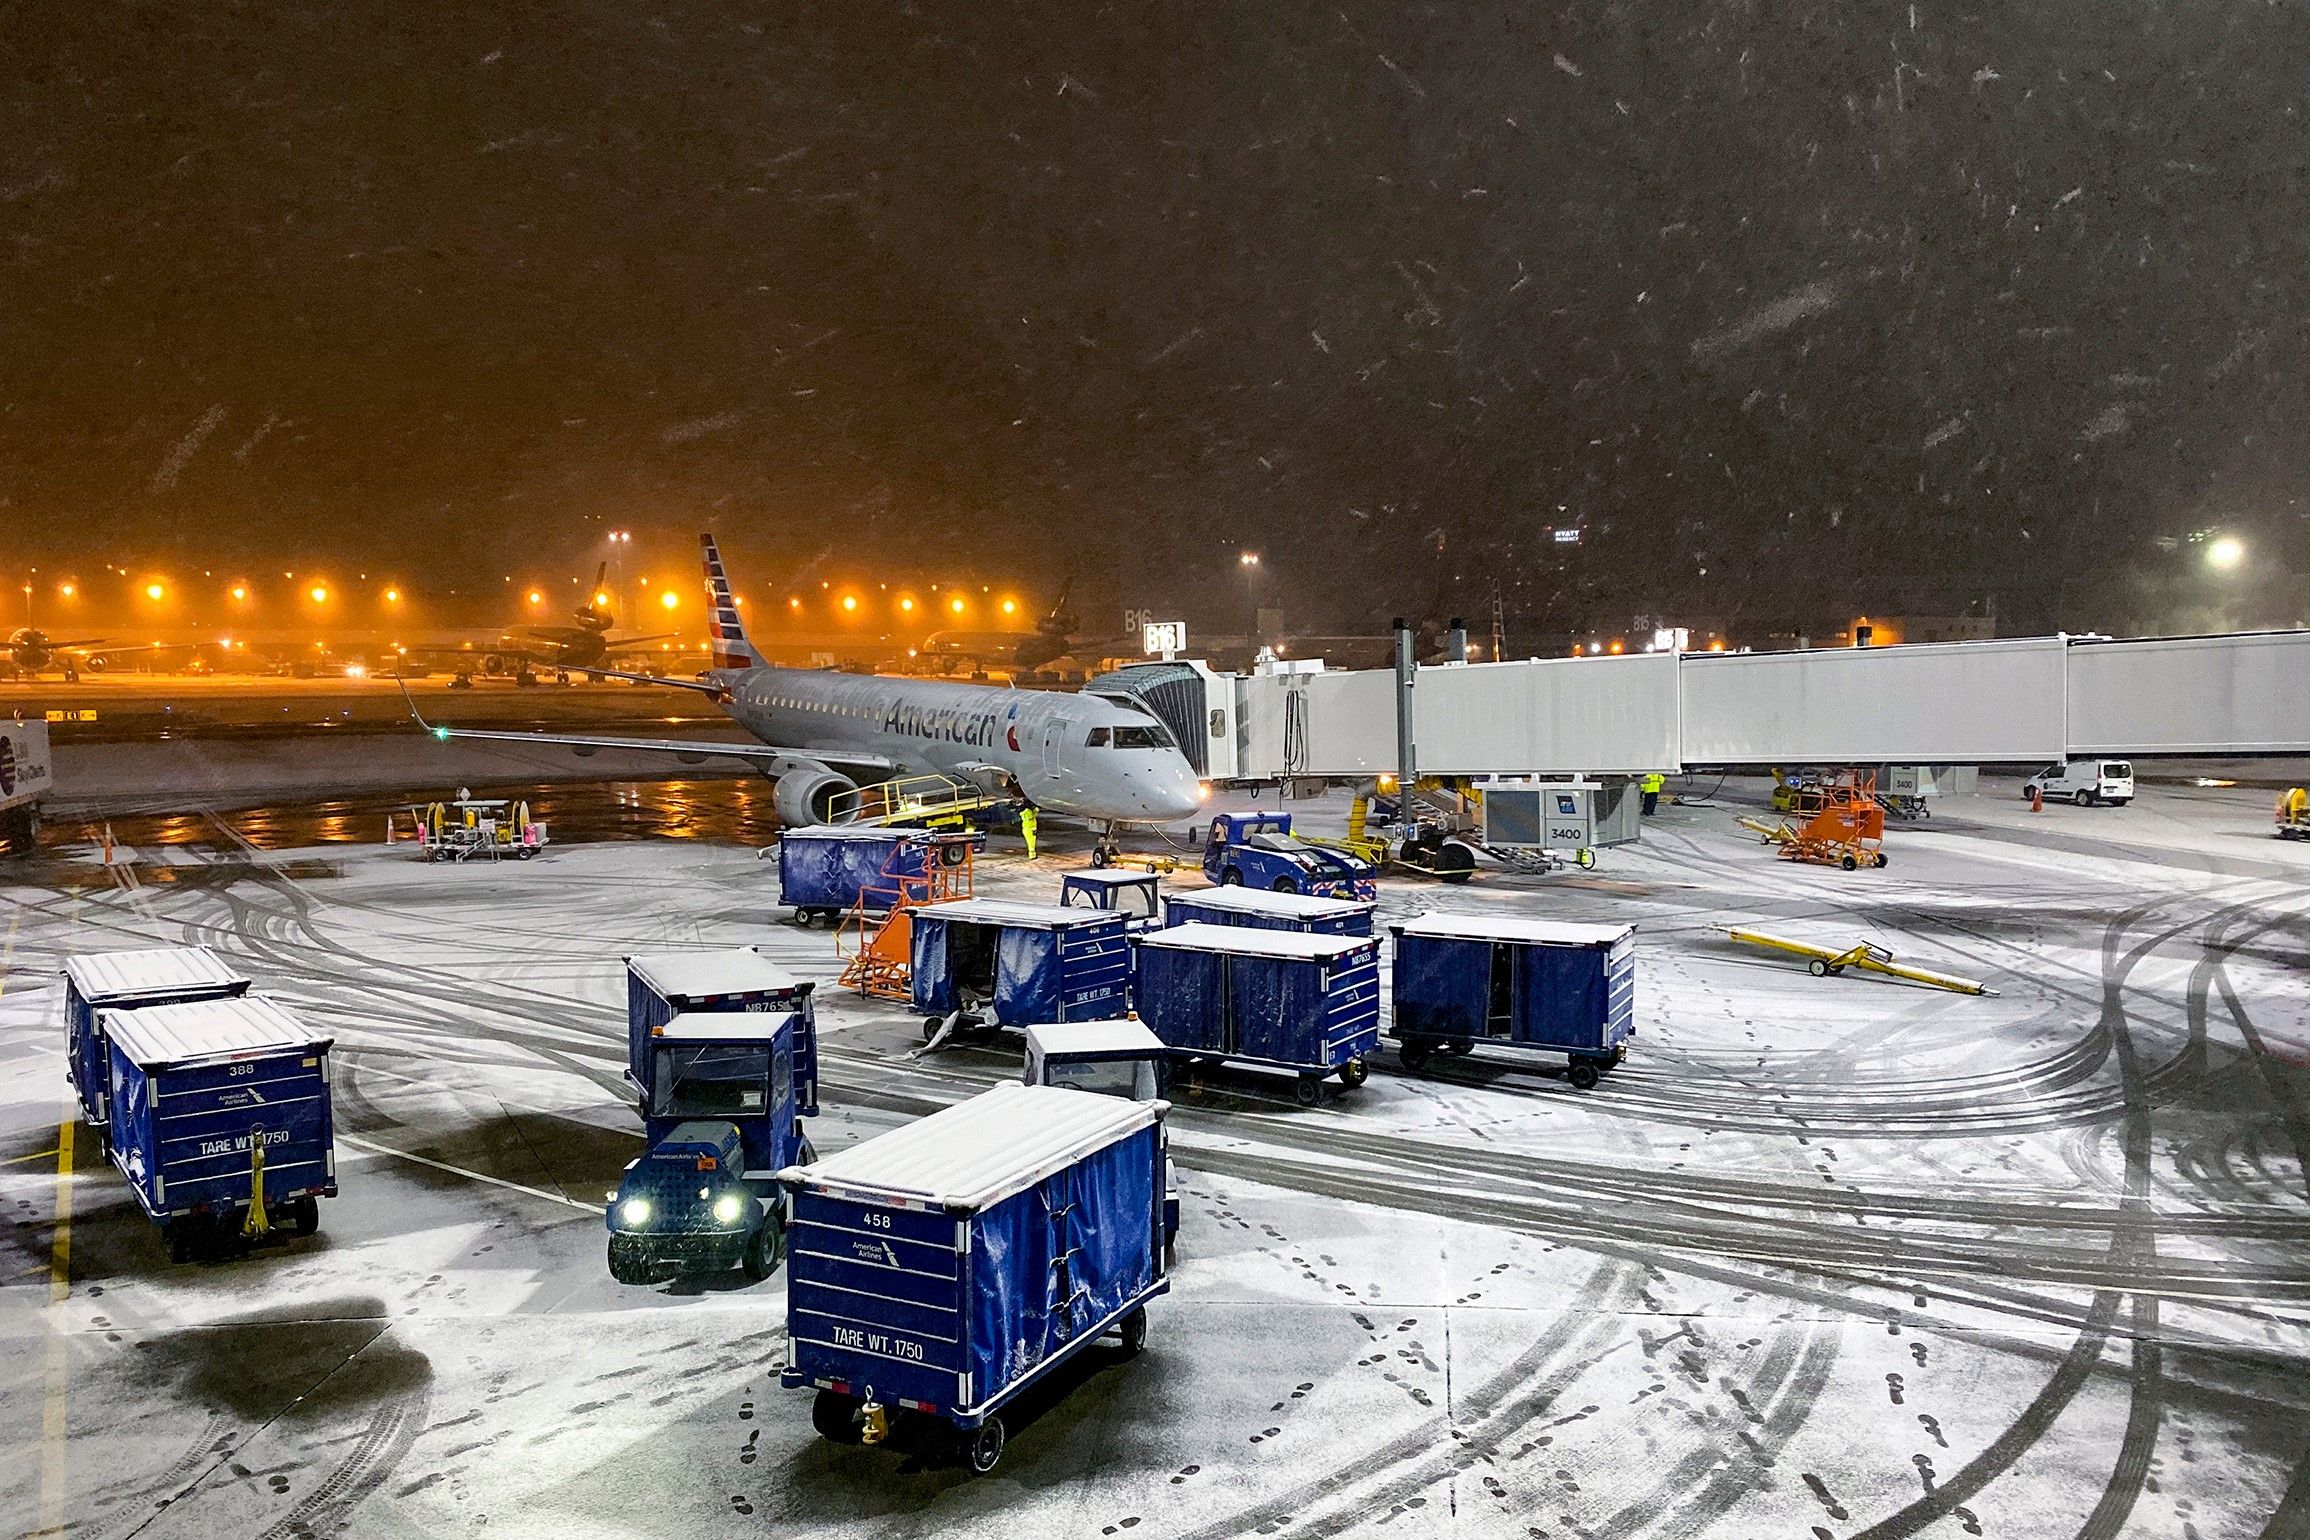 American Airlines Embraer E-Jet Parked In Snowy Conditions